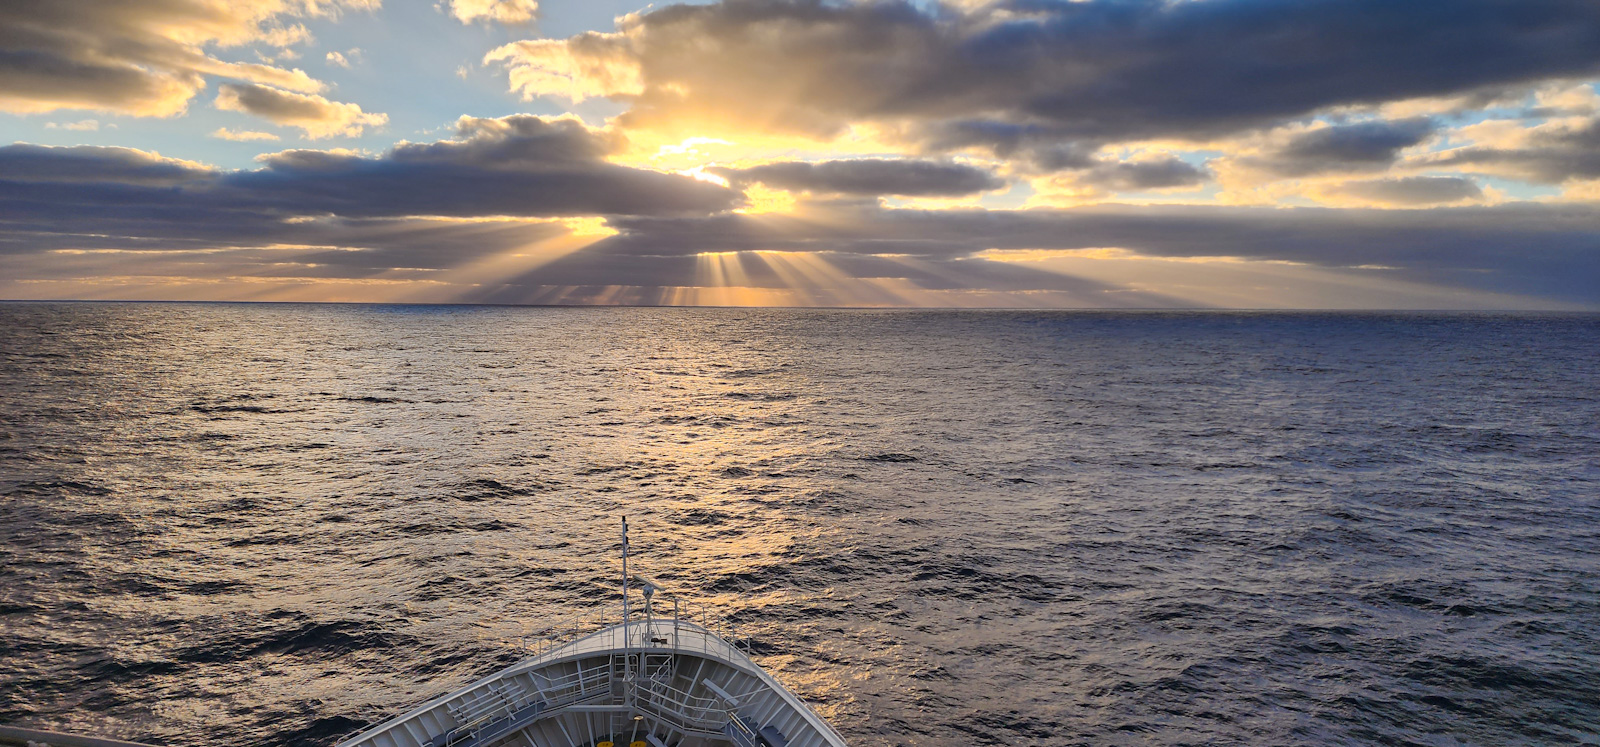 Sunset aboard a cruise ship in the Atlantic Ocean